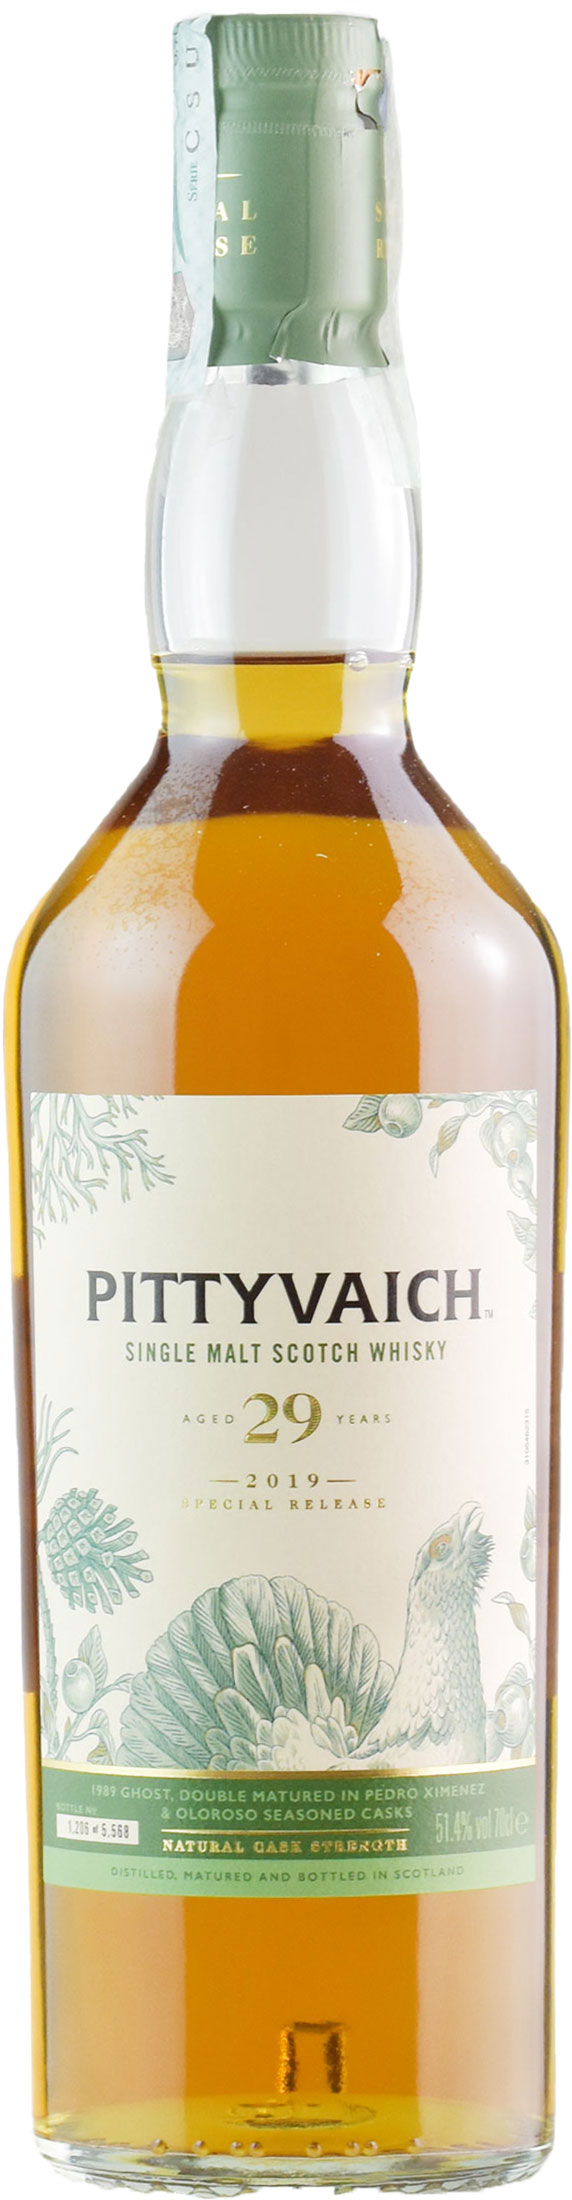 Pittyvaich SIngle Malt Scotch Whisky Special Release Natural Cask Strenght 29 Anni